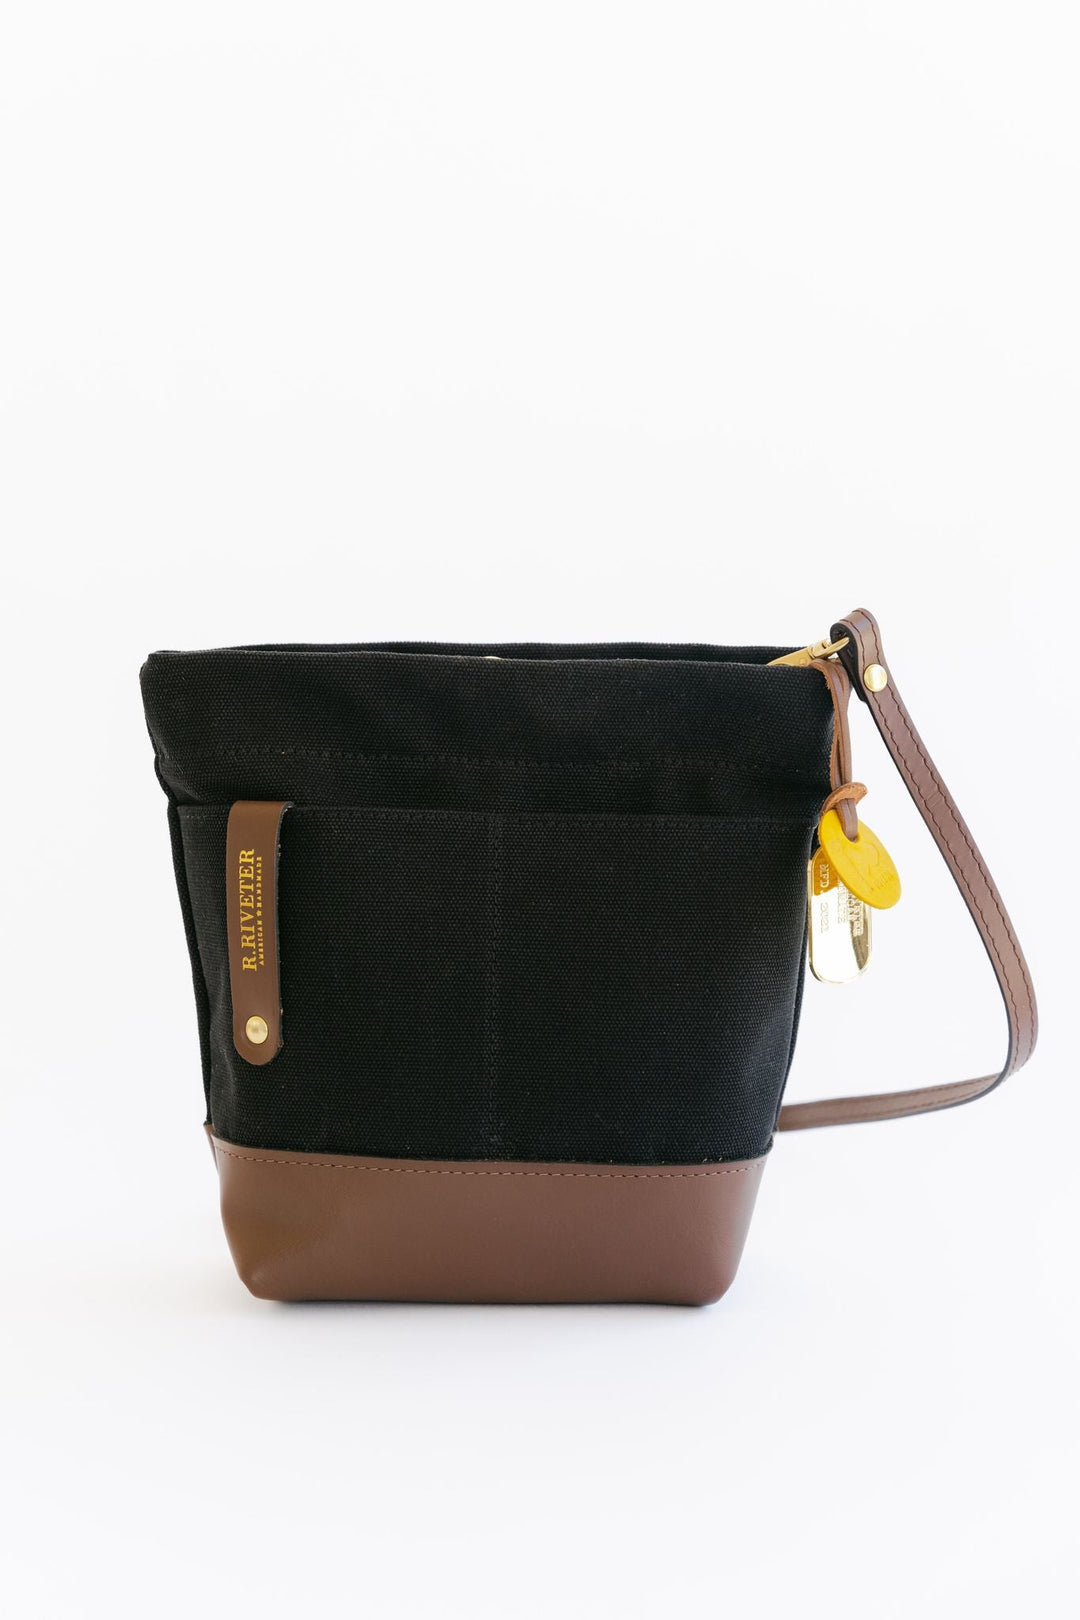 Betsy | Signature Black Canvas + Brown Leather